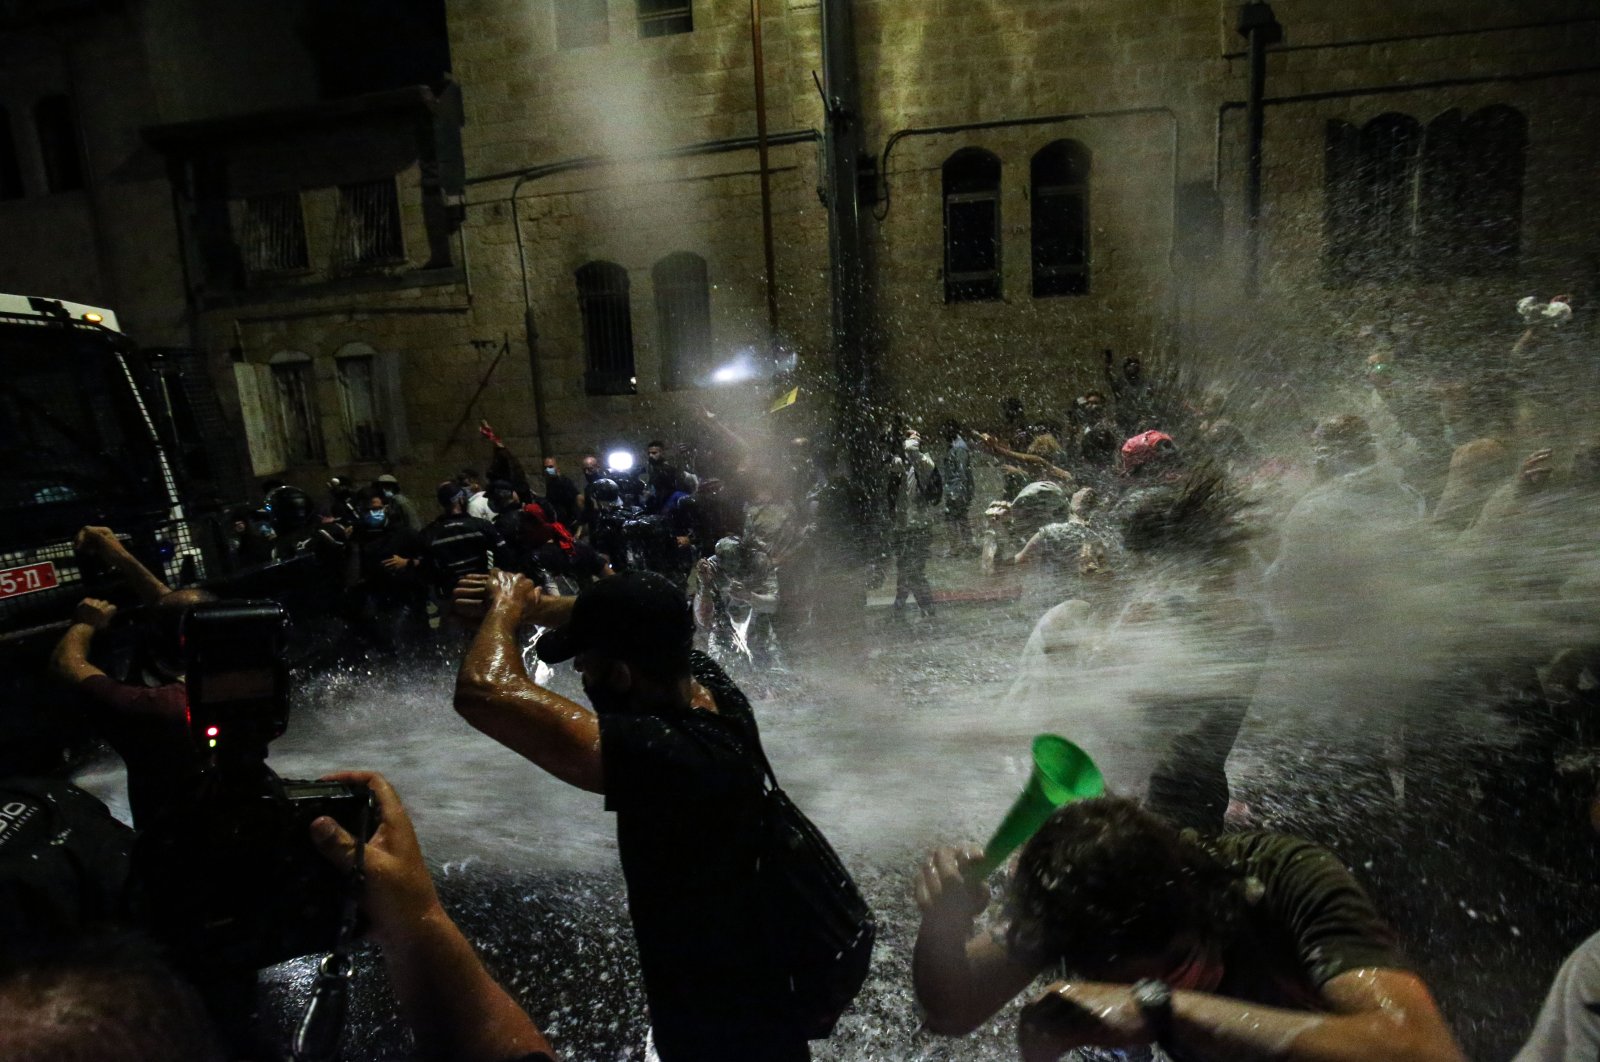 Israeli police use water cannons to disperse demonstrators protesting against the government response to the coronavirus pandemic in Jerusalem on July 18, 2020. (AA Photo)